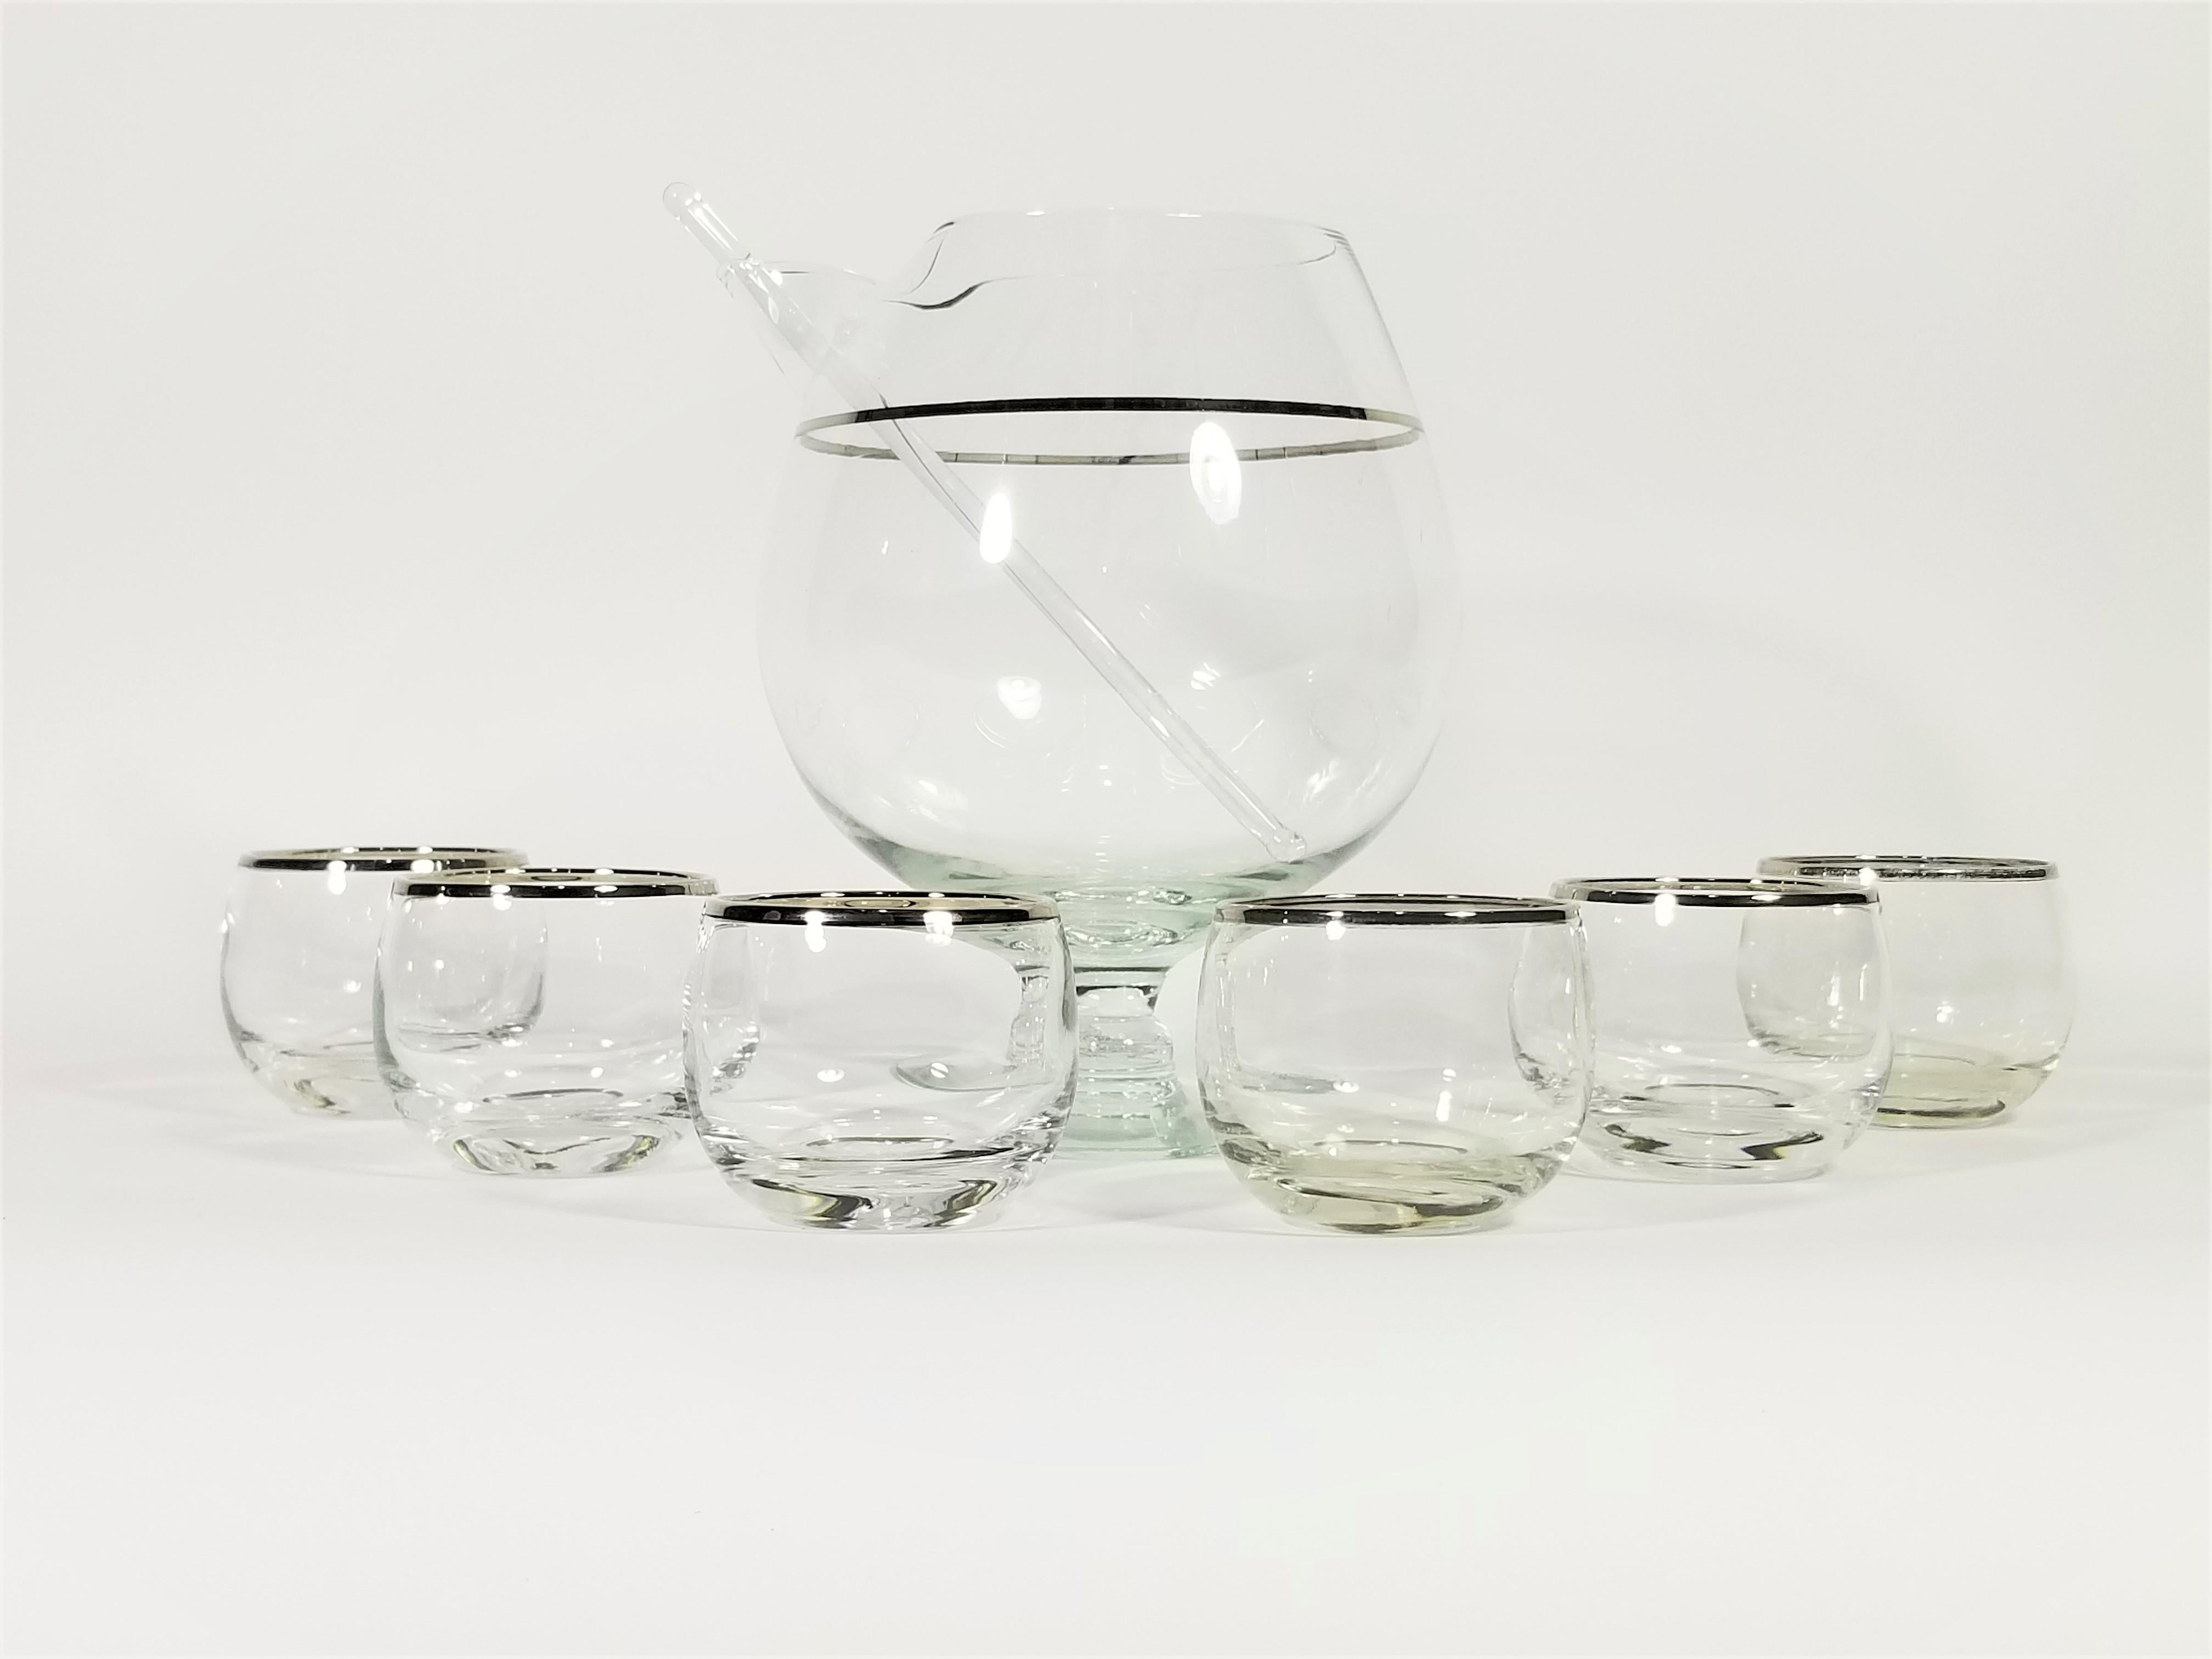 1960s Mid Century Modern Martini Set. Silver rimmed Glassware Barware in the style of Dorothy Thorpe. Pitcher with stirrer and six glasses. Glasses are often referred to as roly poly glasses due to their round modern shape. 


Martini Pitcher